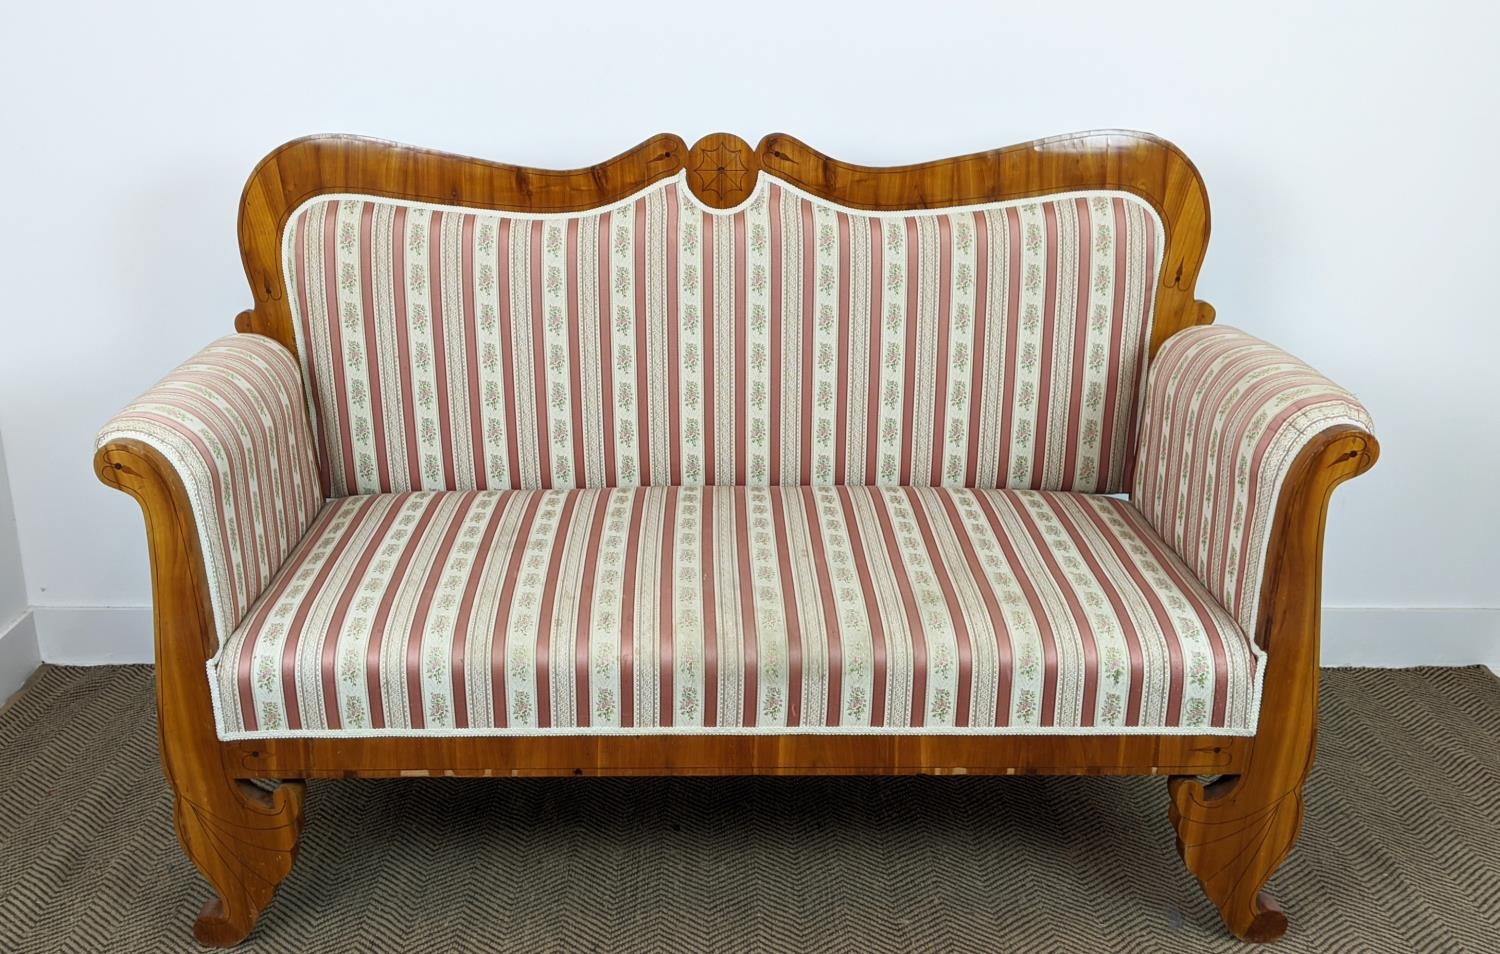 SOFA, Biedermeier cherrywood and line inlaid with pink striped upholstery, 104cm H x 168cm x 68cm.